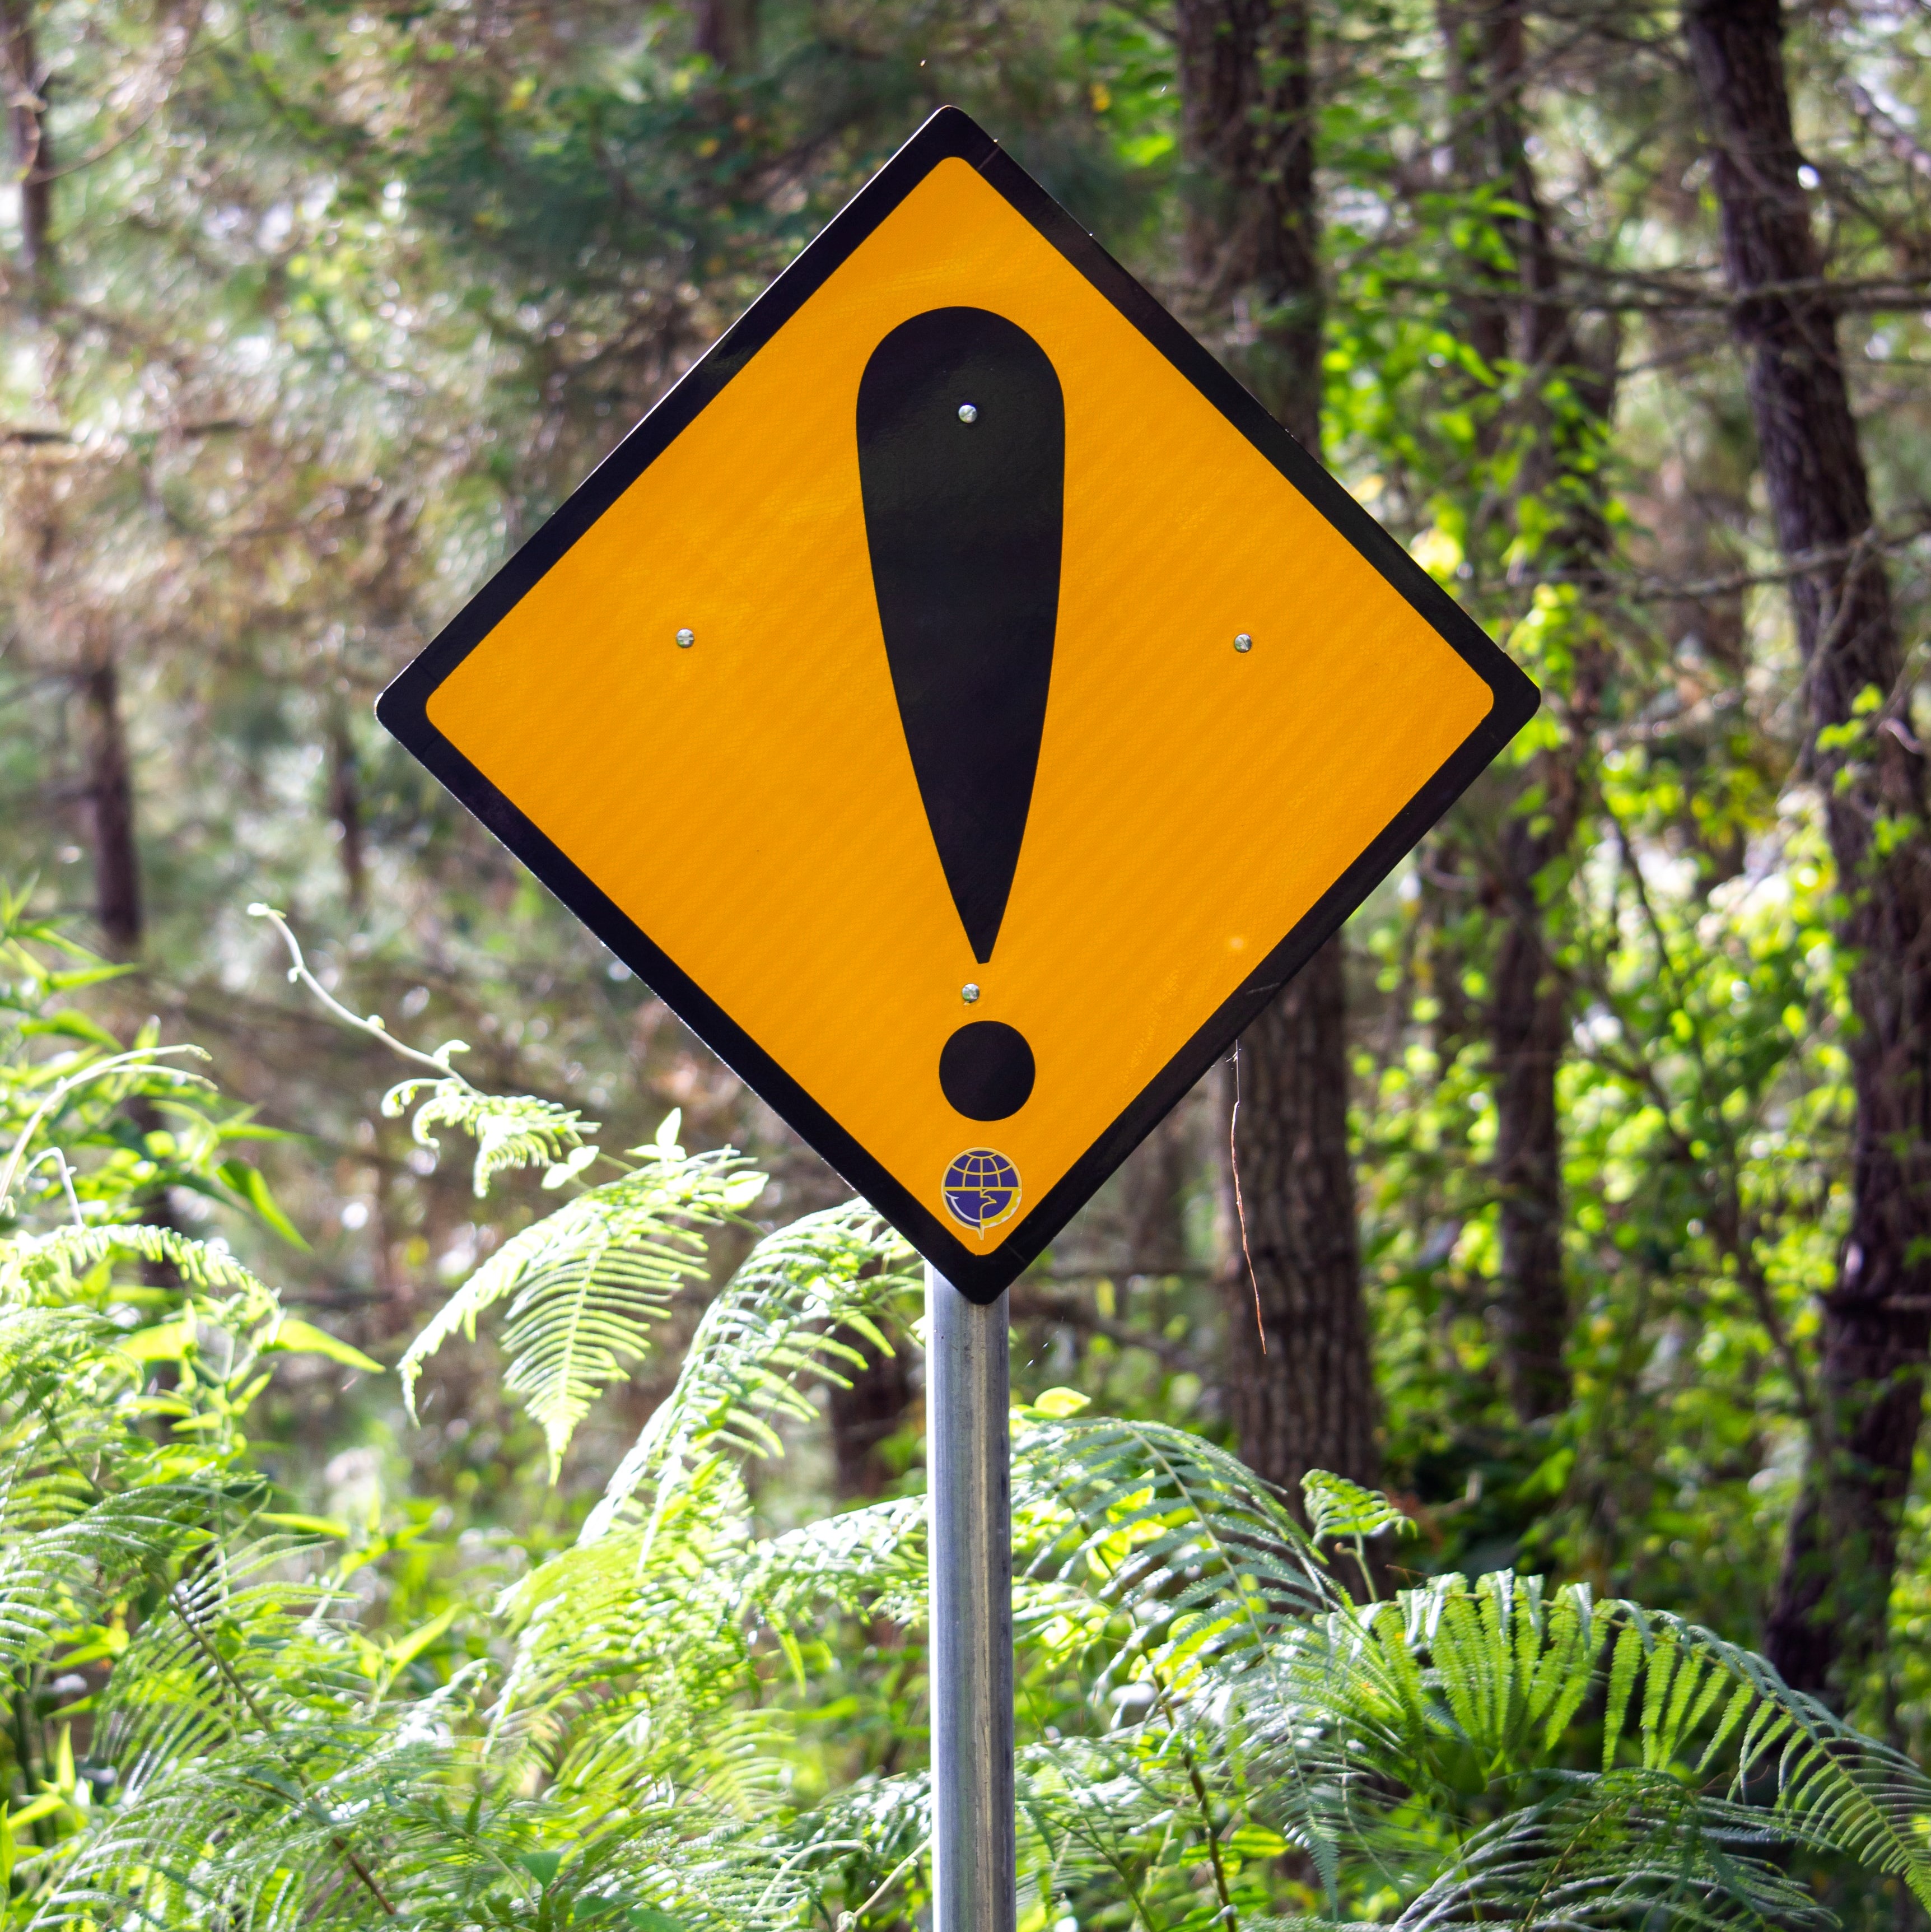 Yellow road sign with black exclamation mark 